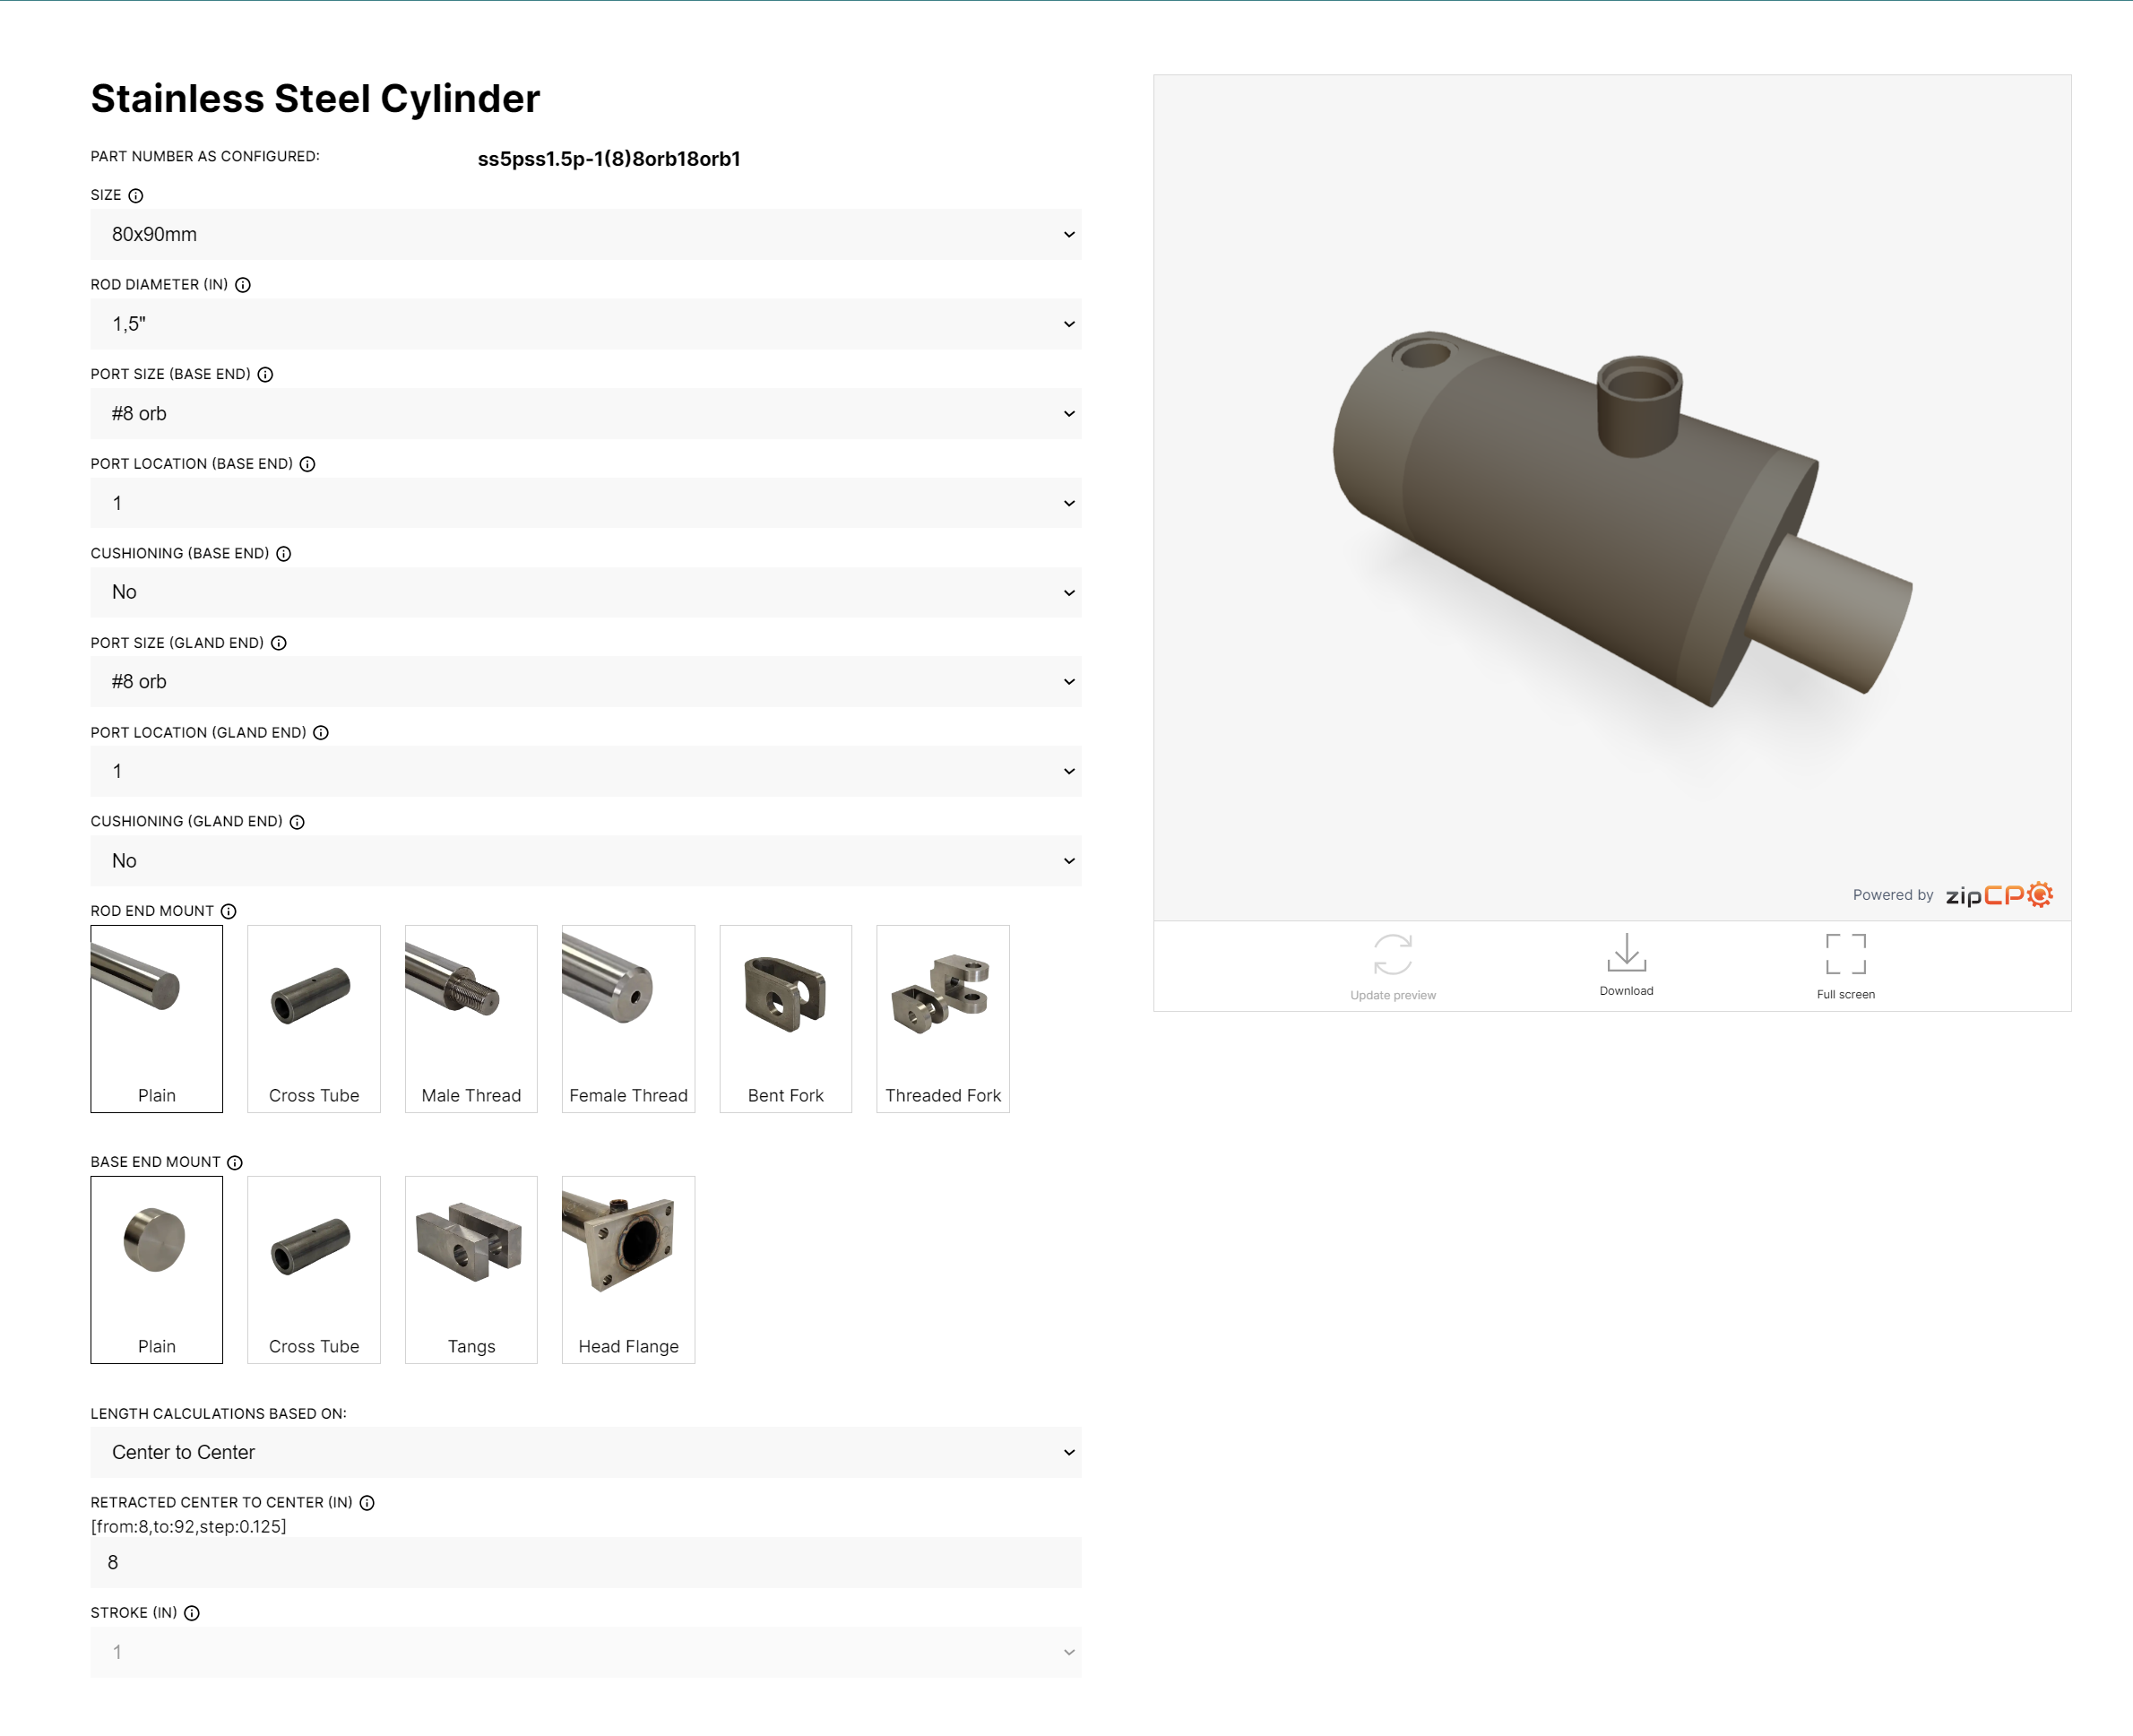 A screenshot of the configuration showing the 3D model of a cylinder and various options for customization.